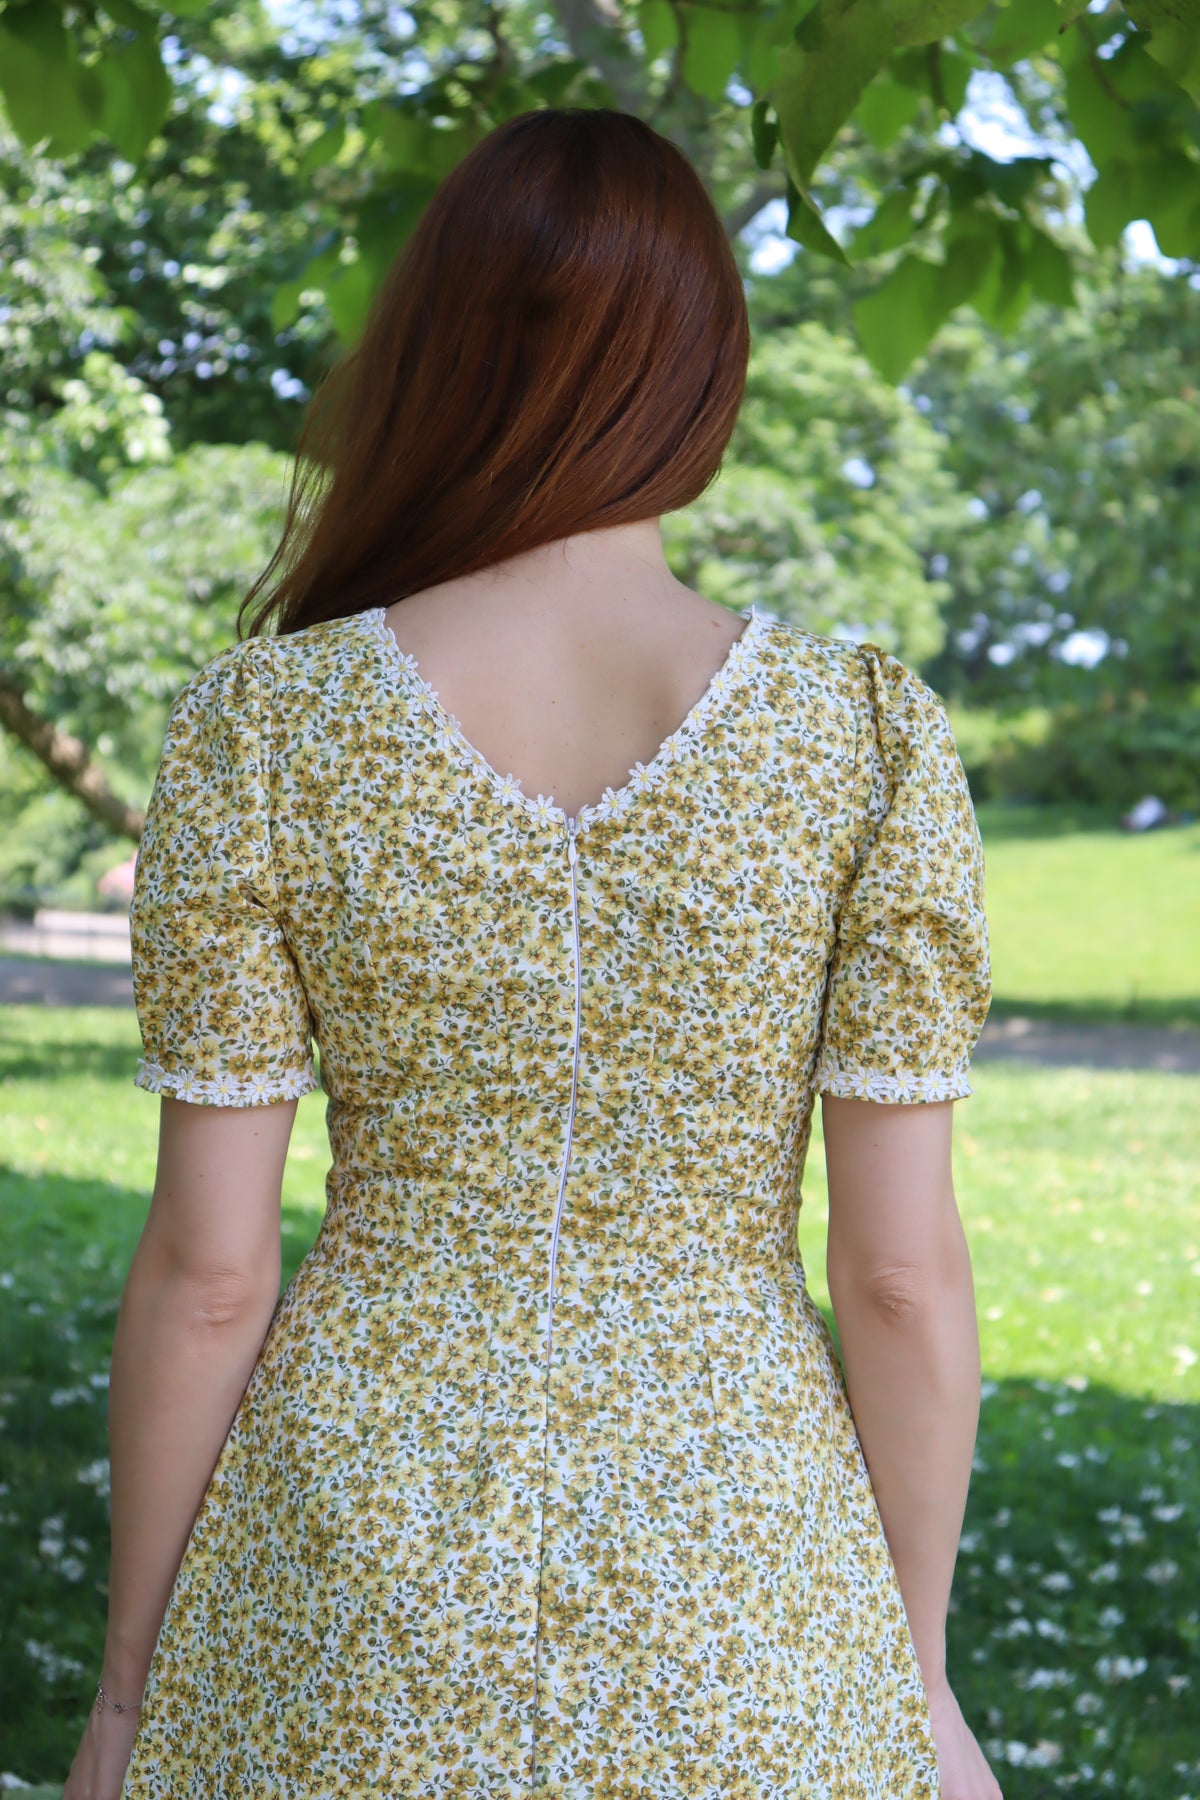 Photo of a model showing the detail of the back neckline of a short yellow floral dress with short sleeves and white daisy trim .